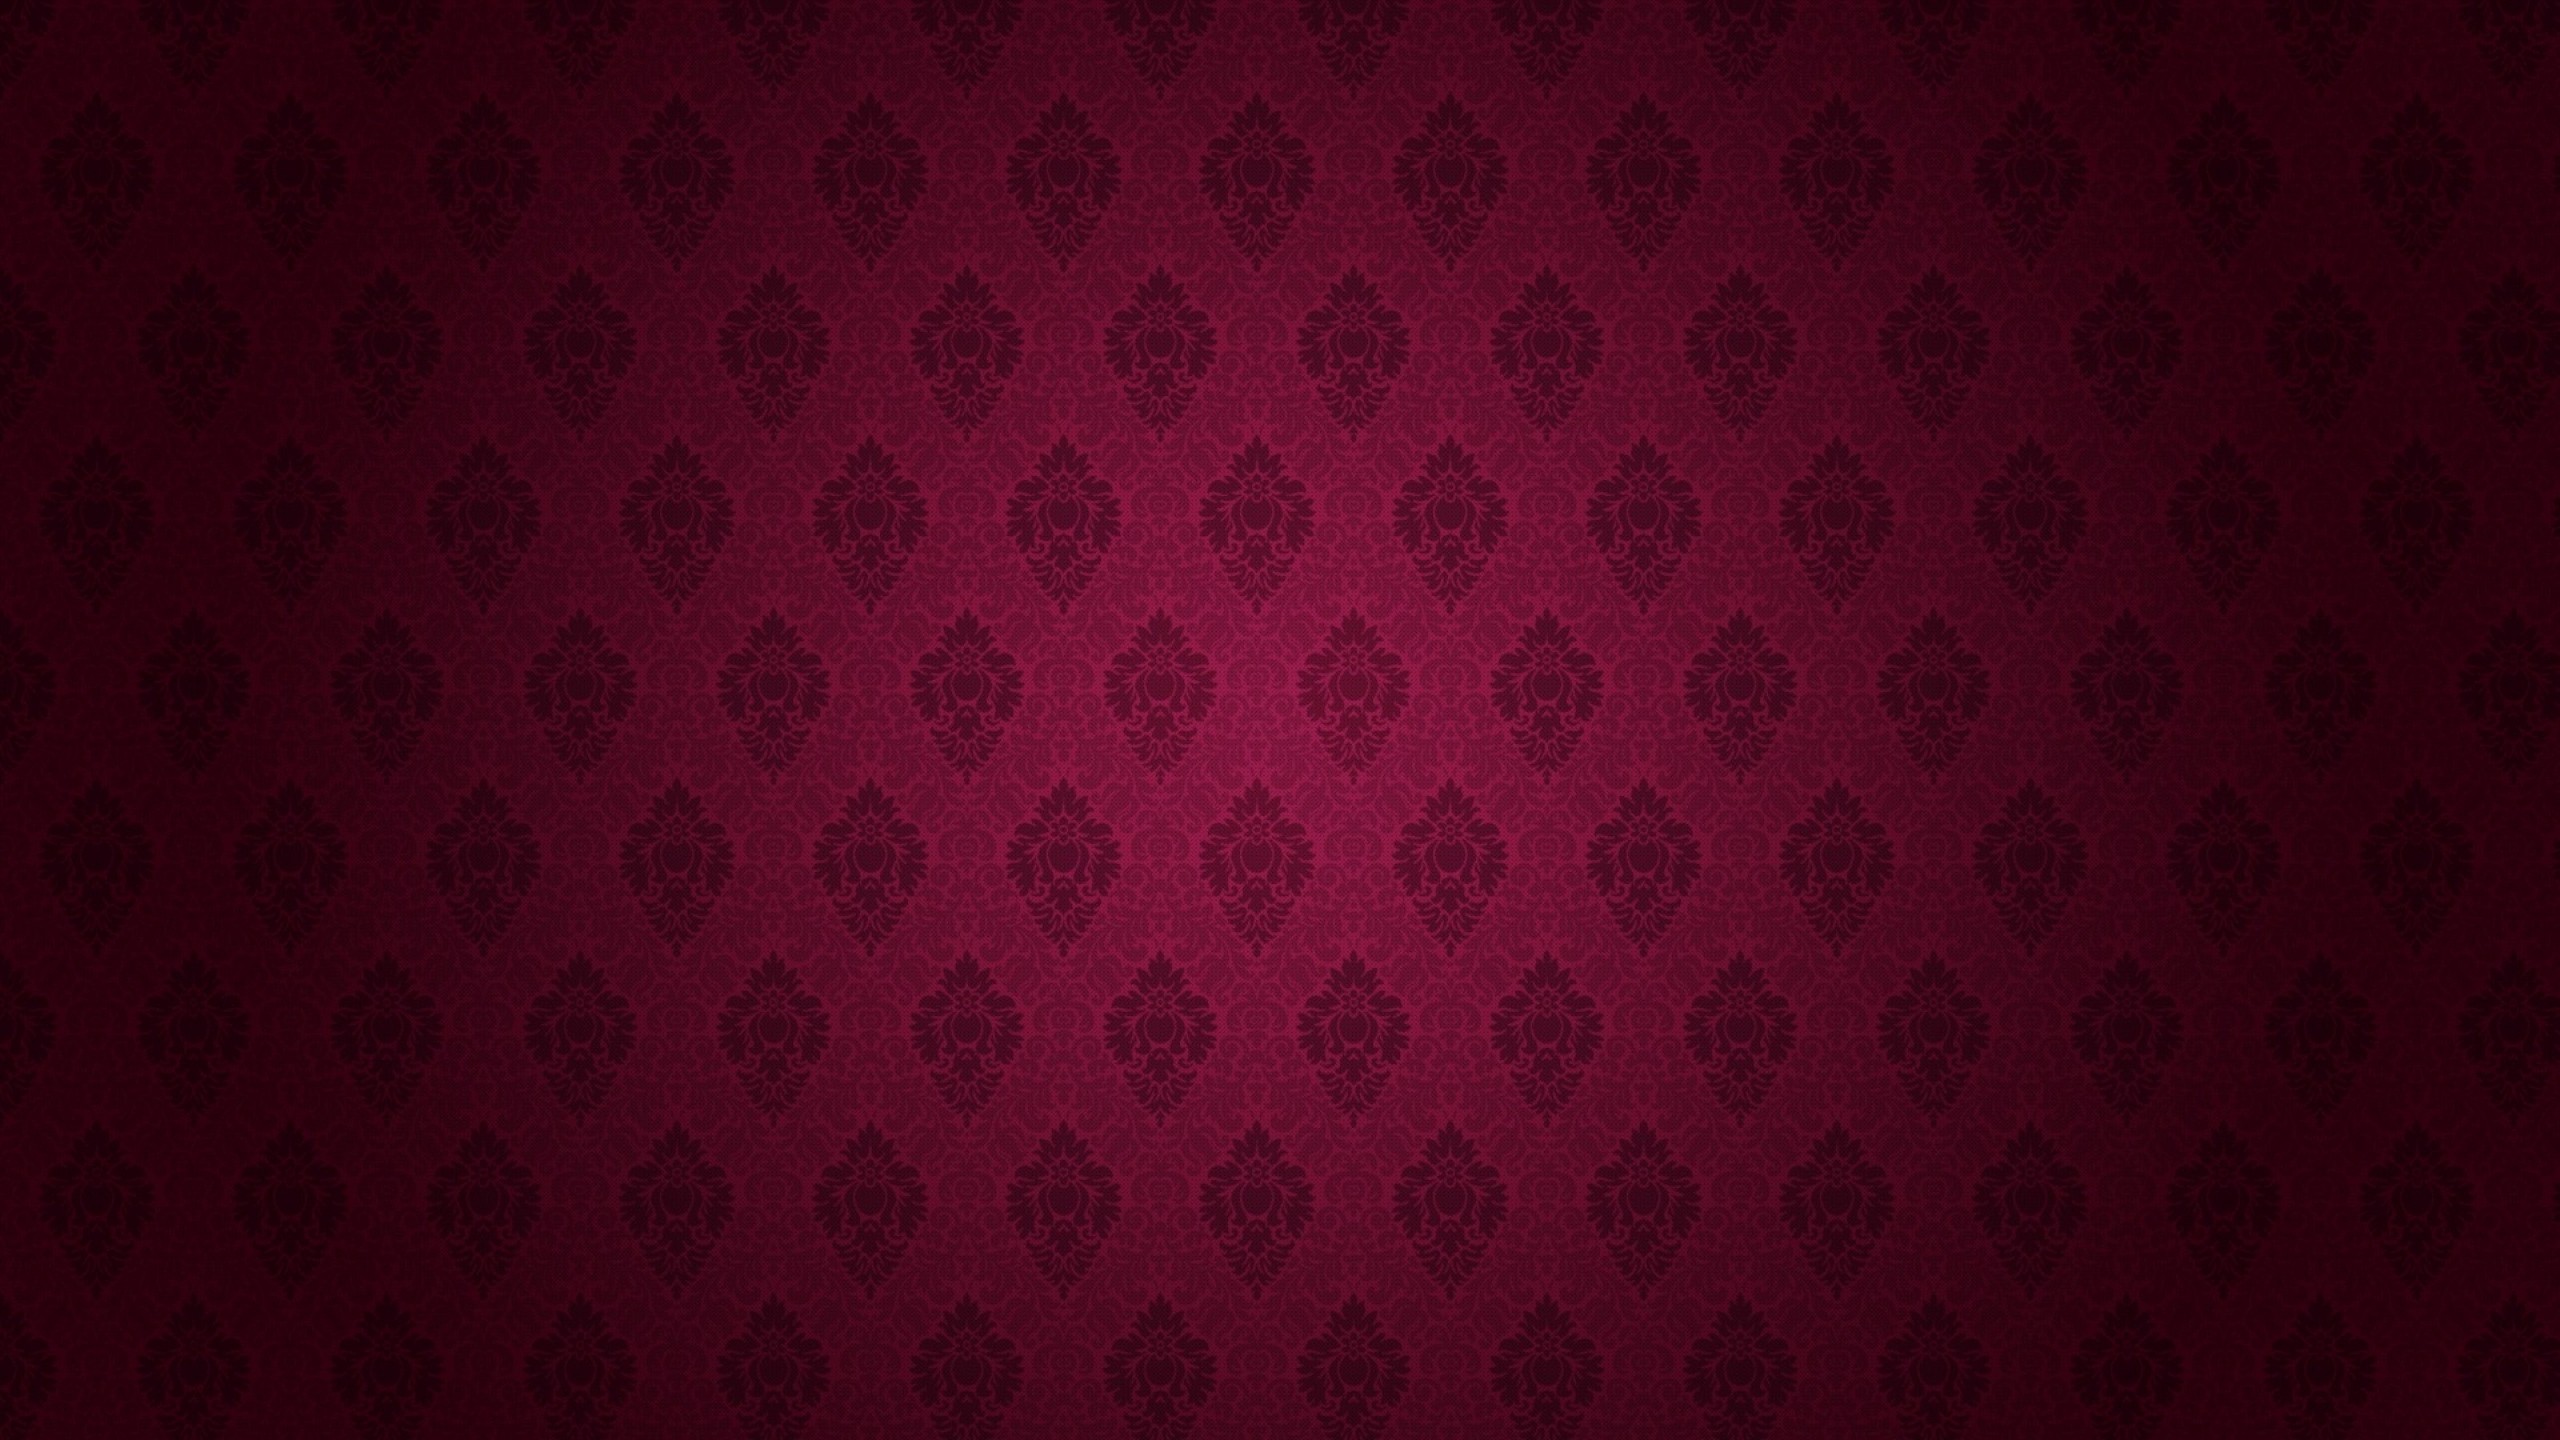 Royal background ·① Download free cool High Resolution